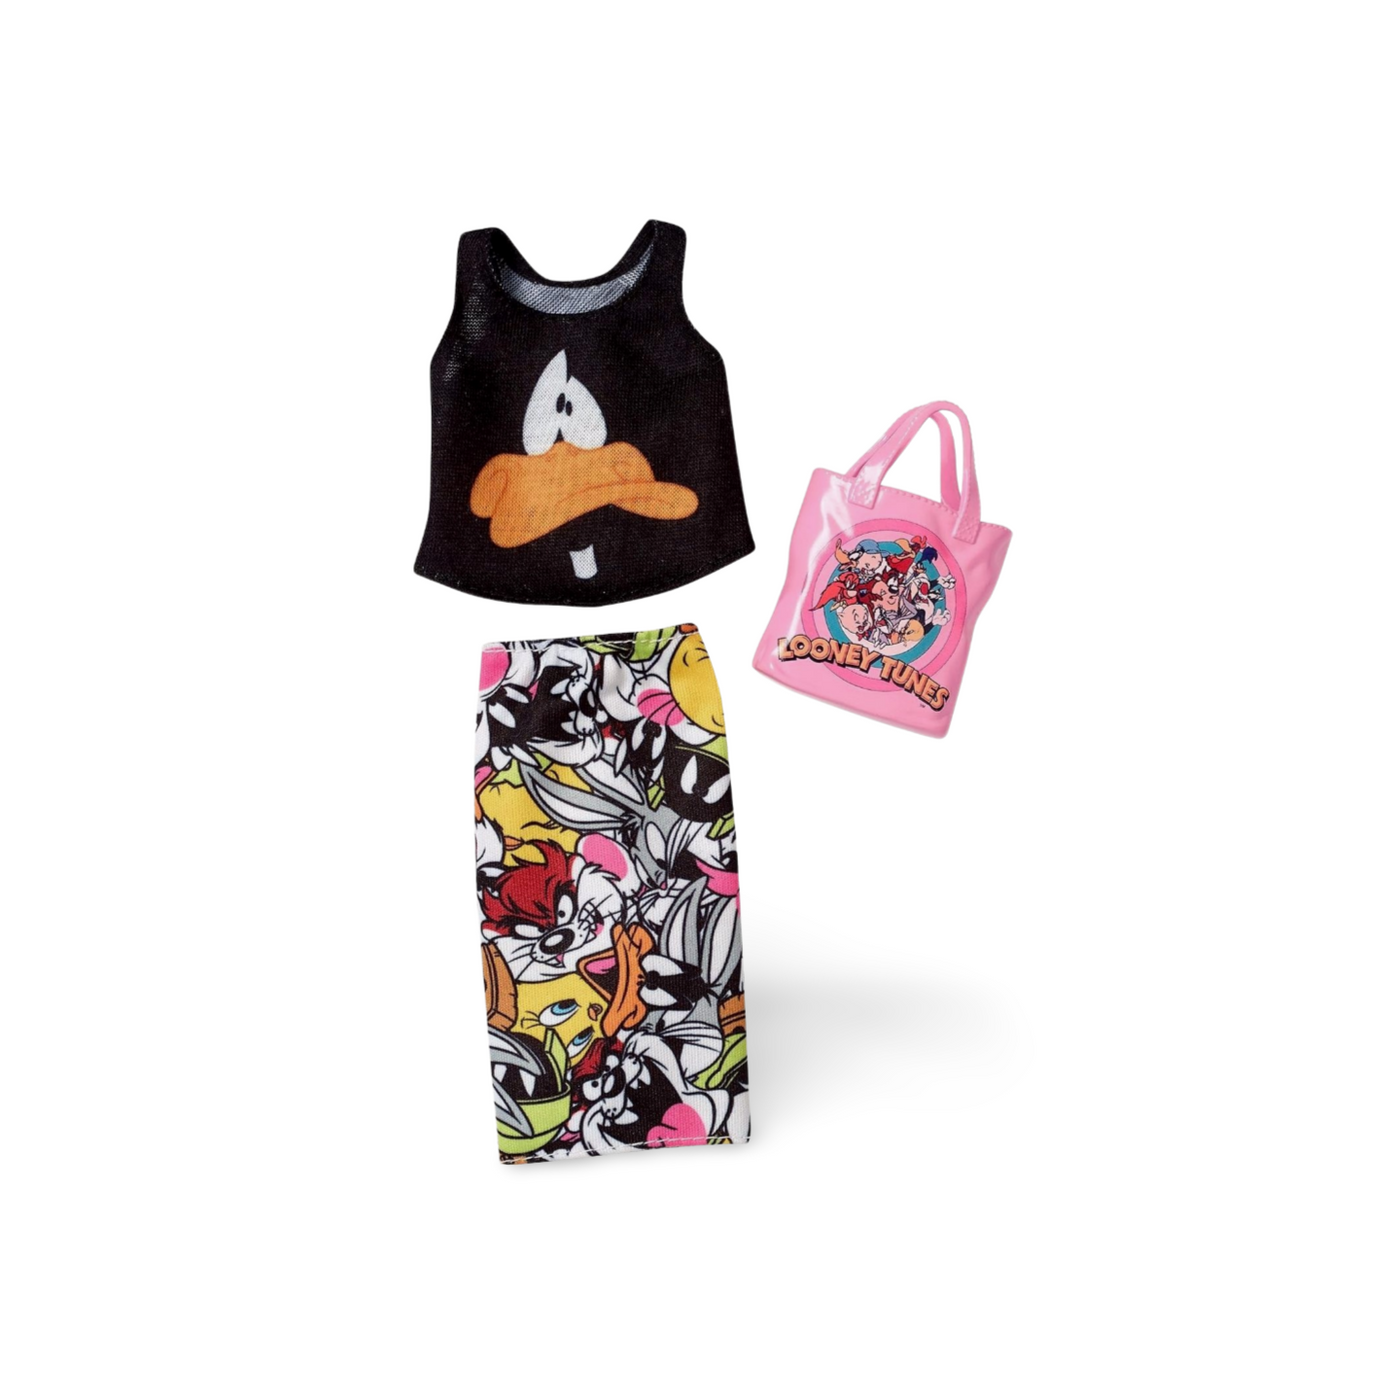 Barbie Clothes: Looney Tunes Daffy Duck Top & Character Skirt Doll & Accessory